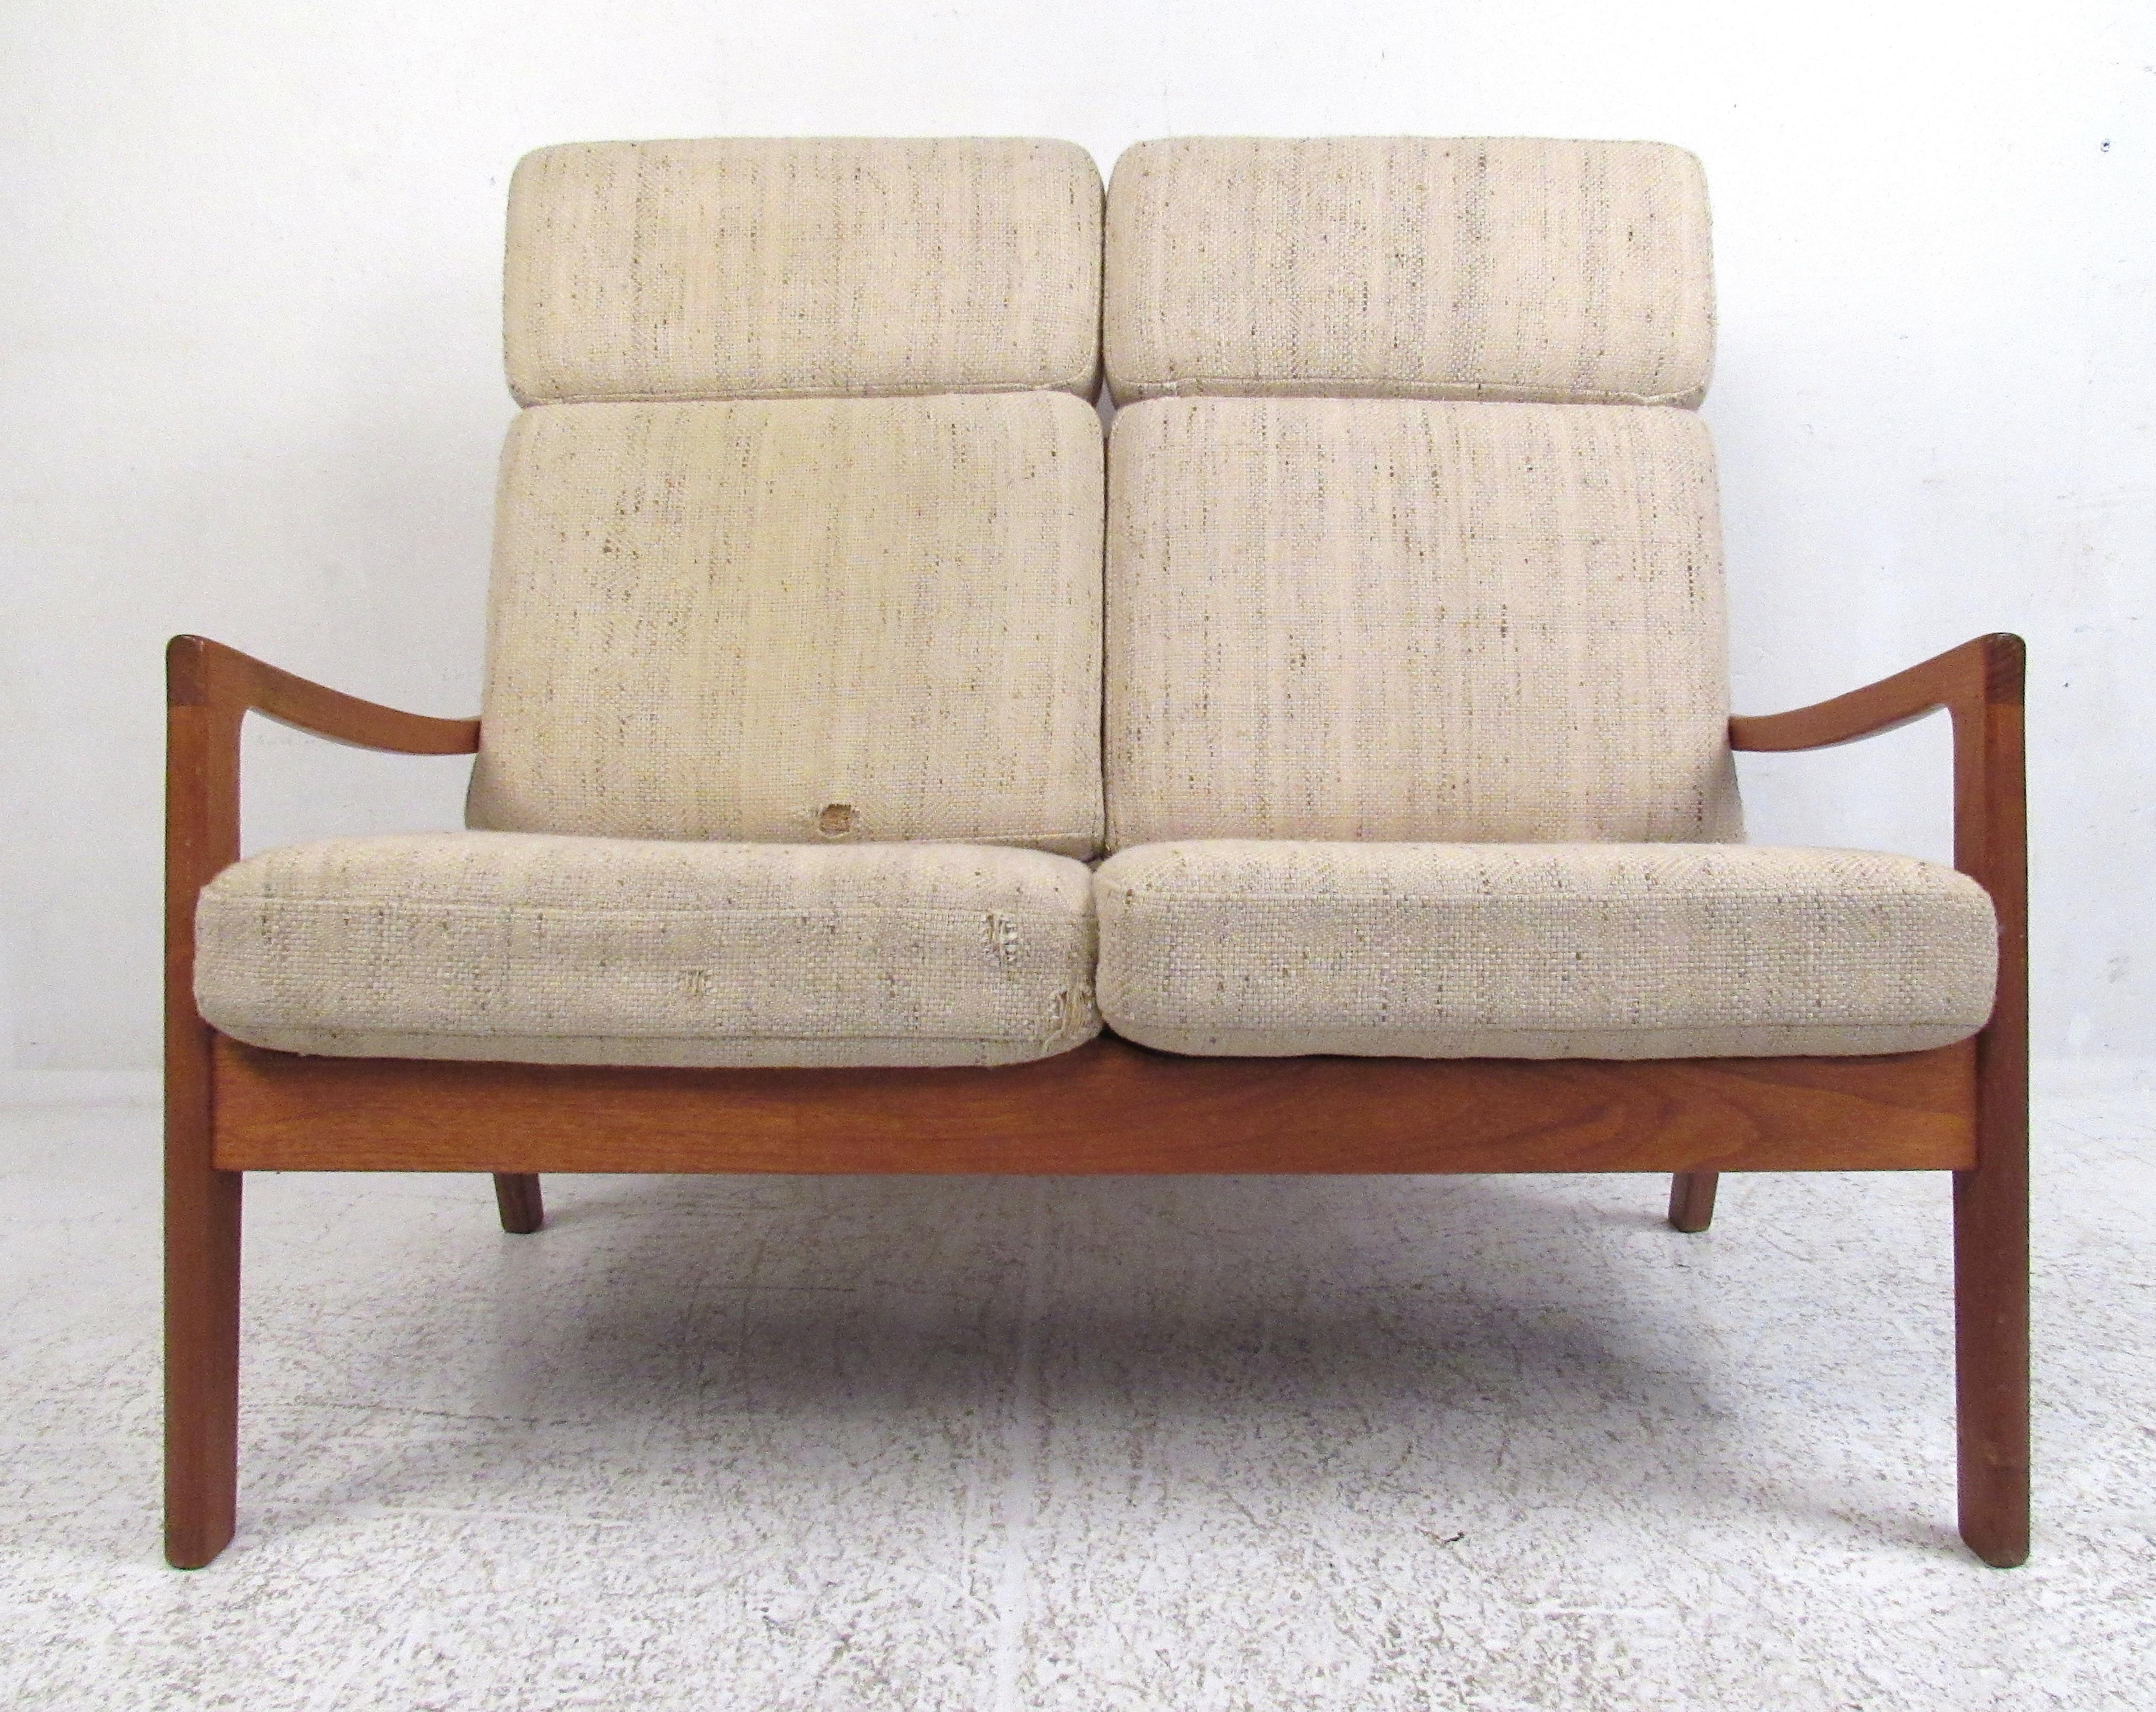 This teak high-back two-seat sofa was designed by Ole Wanscher as part of his 'Senator' line, circa 1960s. Please confirm item location (NY or NJ) with dealer.